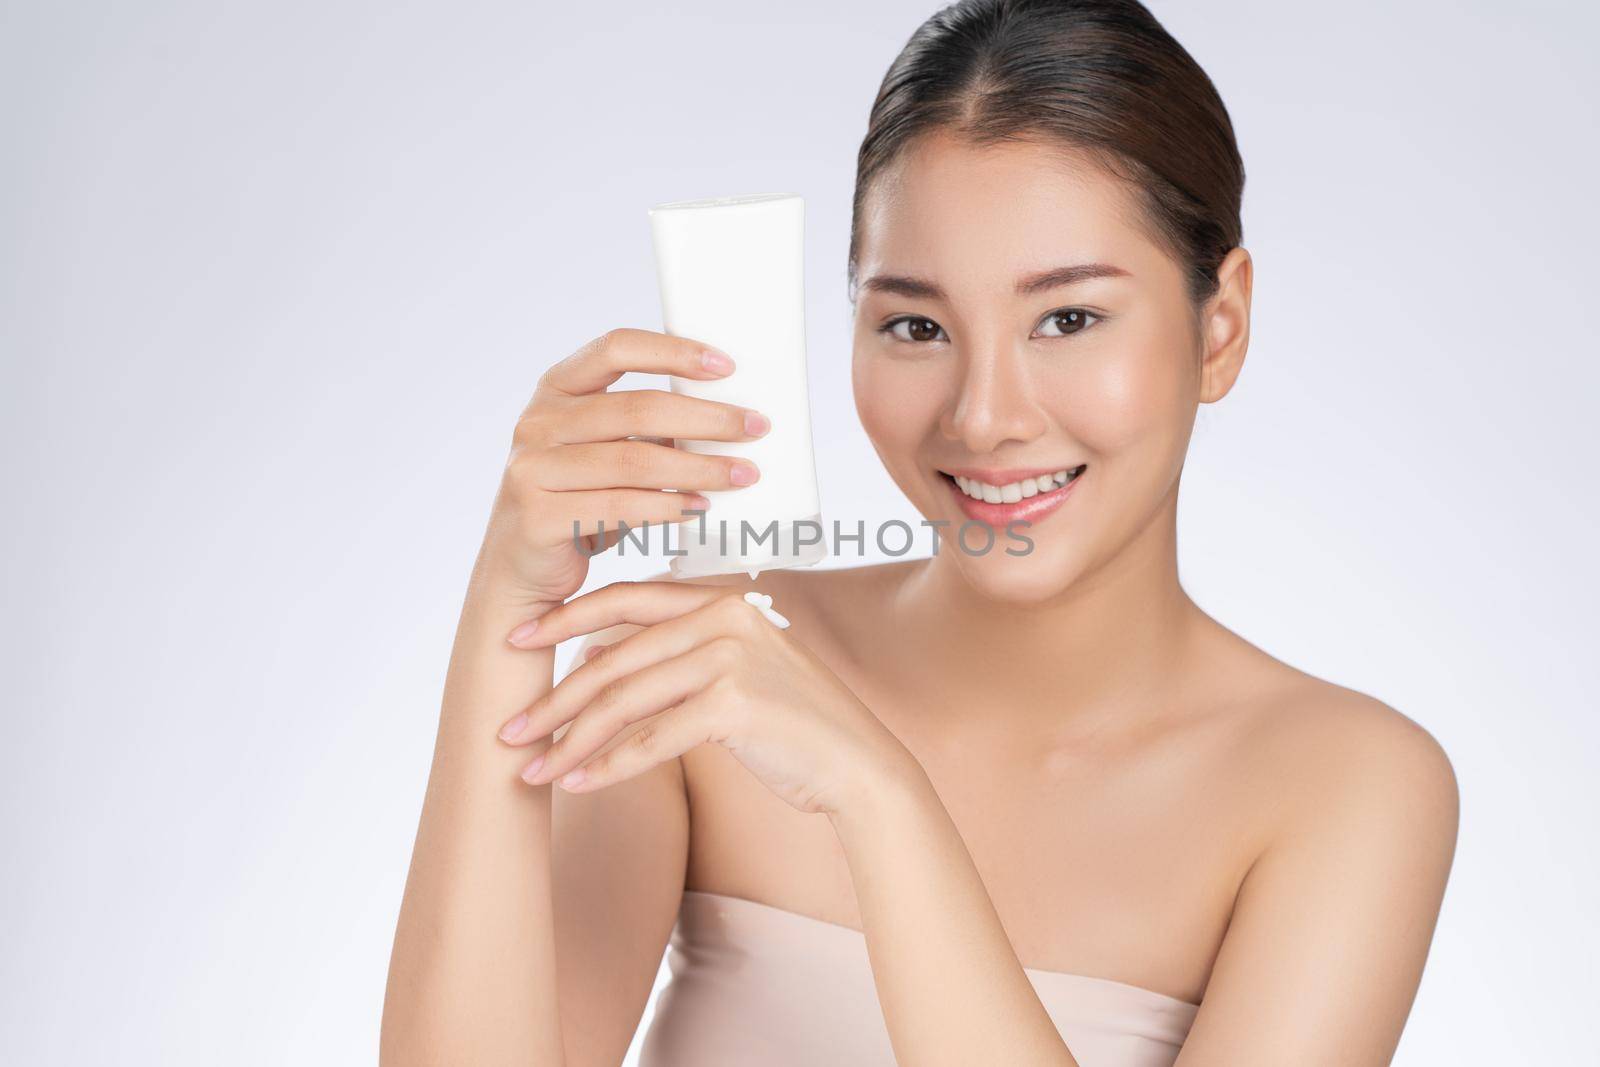 Gorgeous woman smiling holding mockup product for advertising text place, light grey background. Concept of healthcare for skin, beauty care product for advertising.